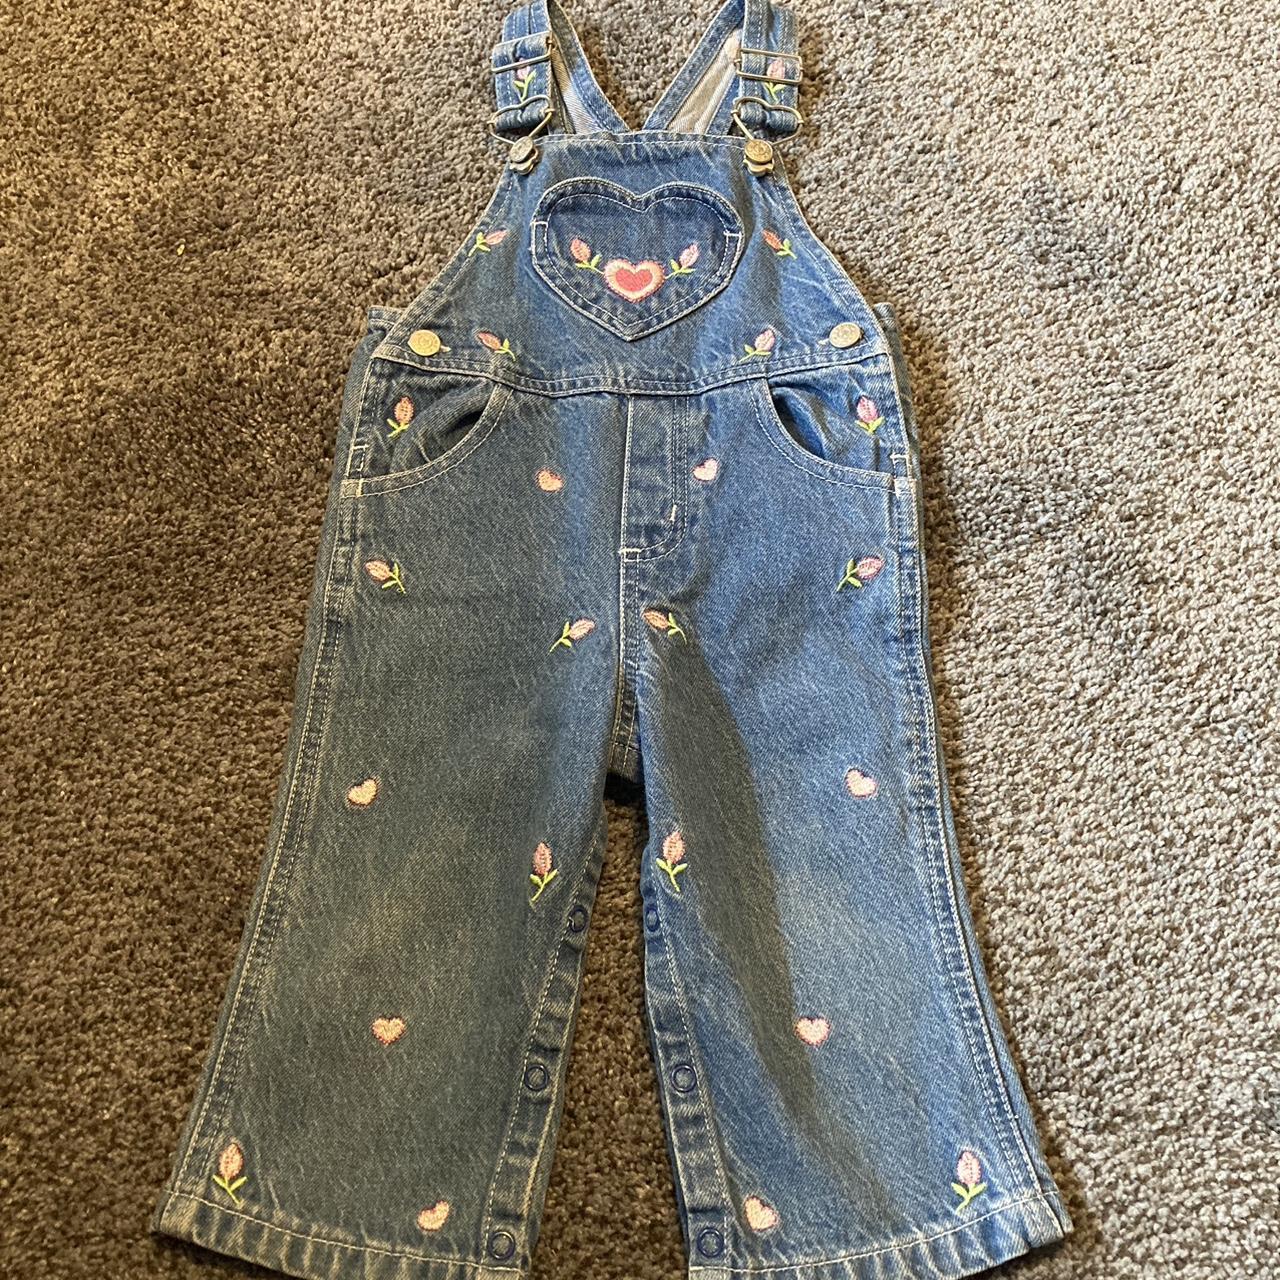 Adorable Pointer Brand Kids Overalls! Made in USA - Depop